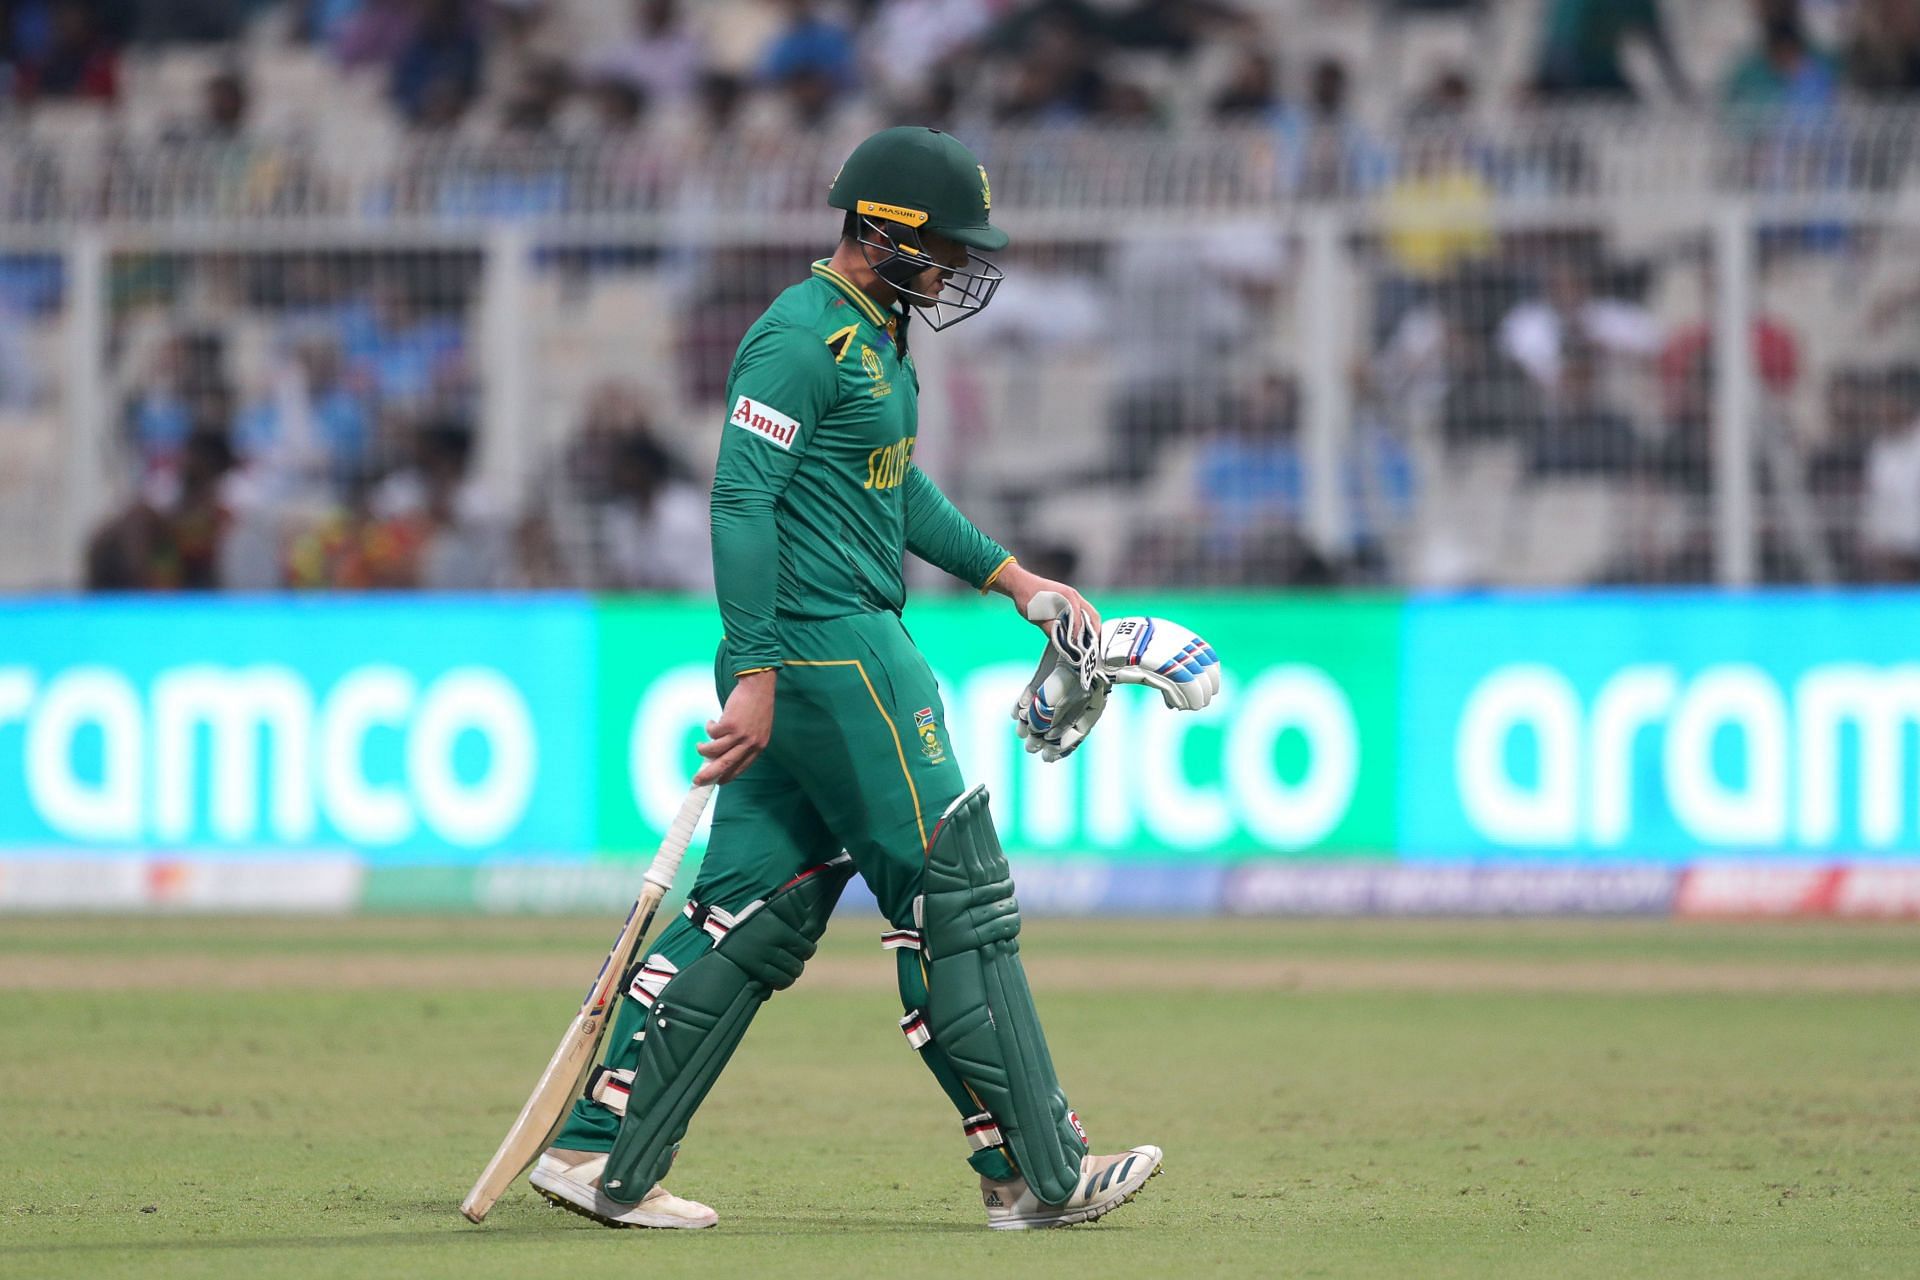 Quinton de Kock retired from ODIs after a prolific World Cup campaign